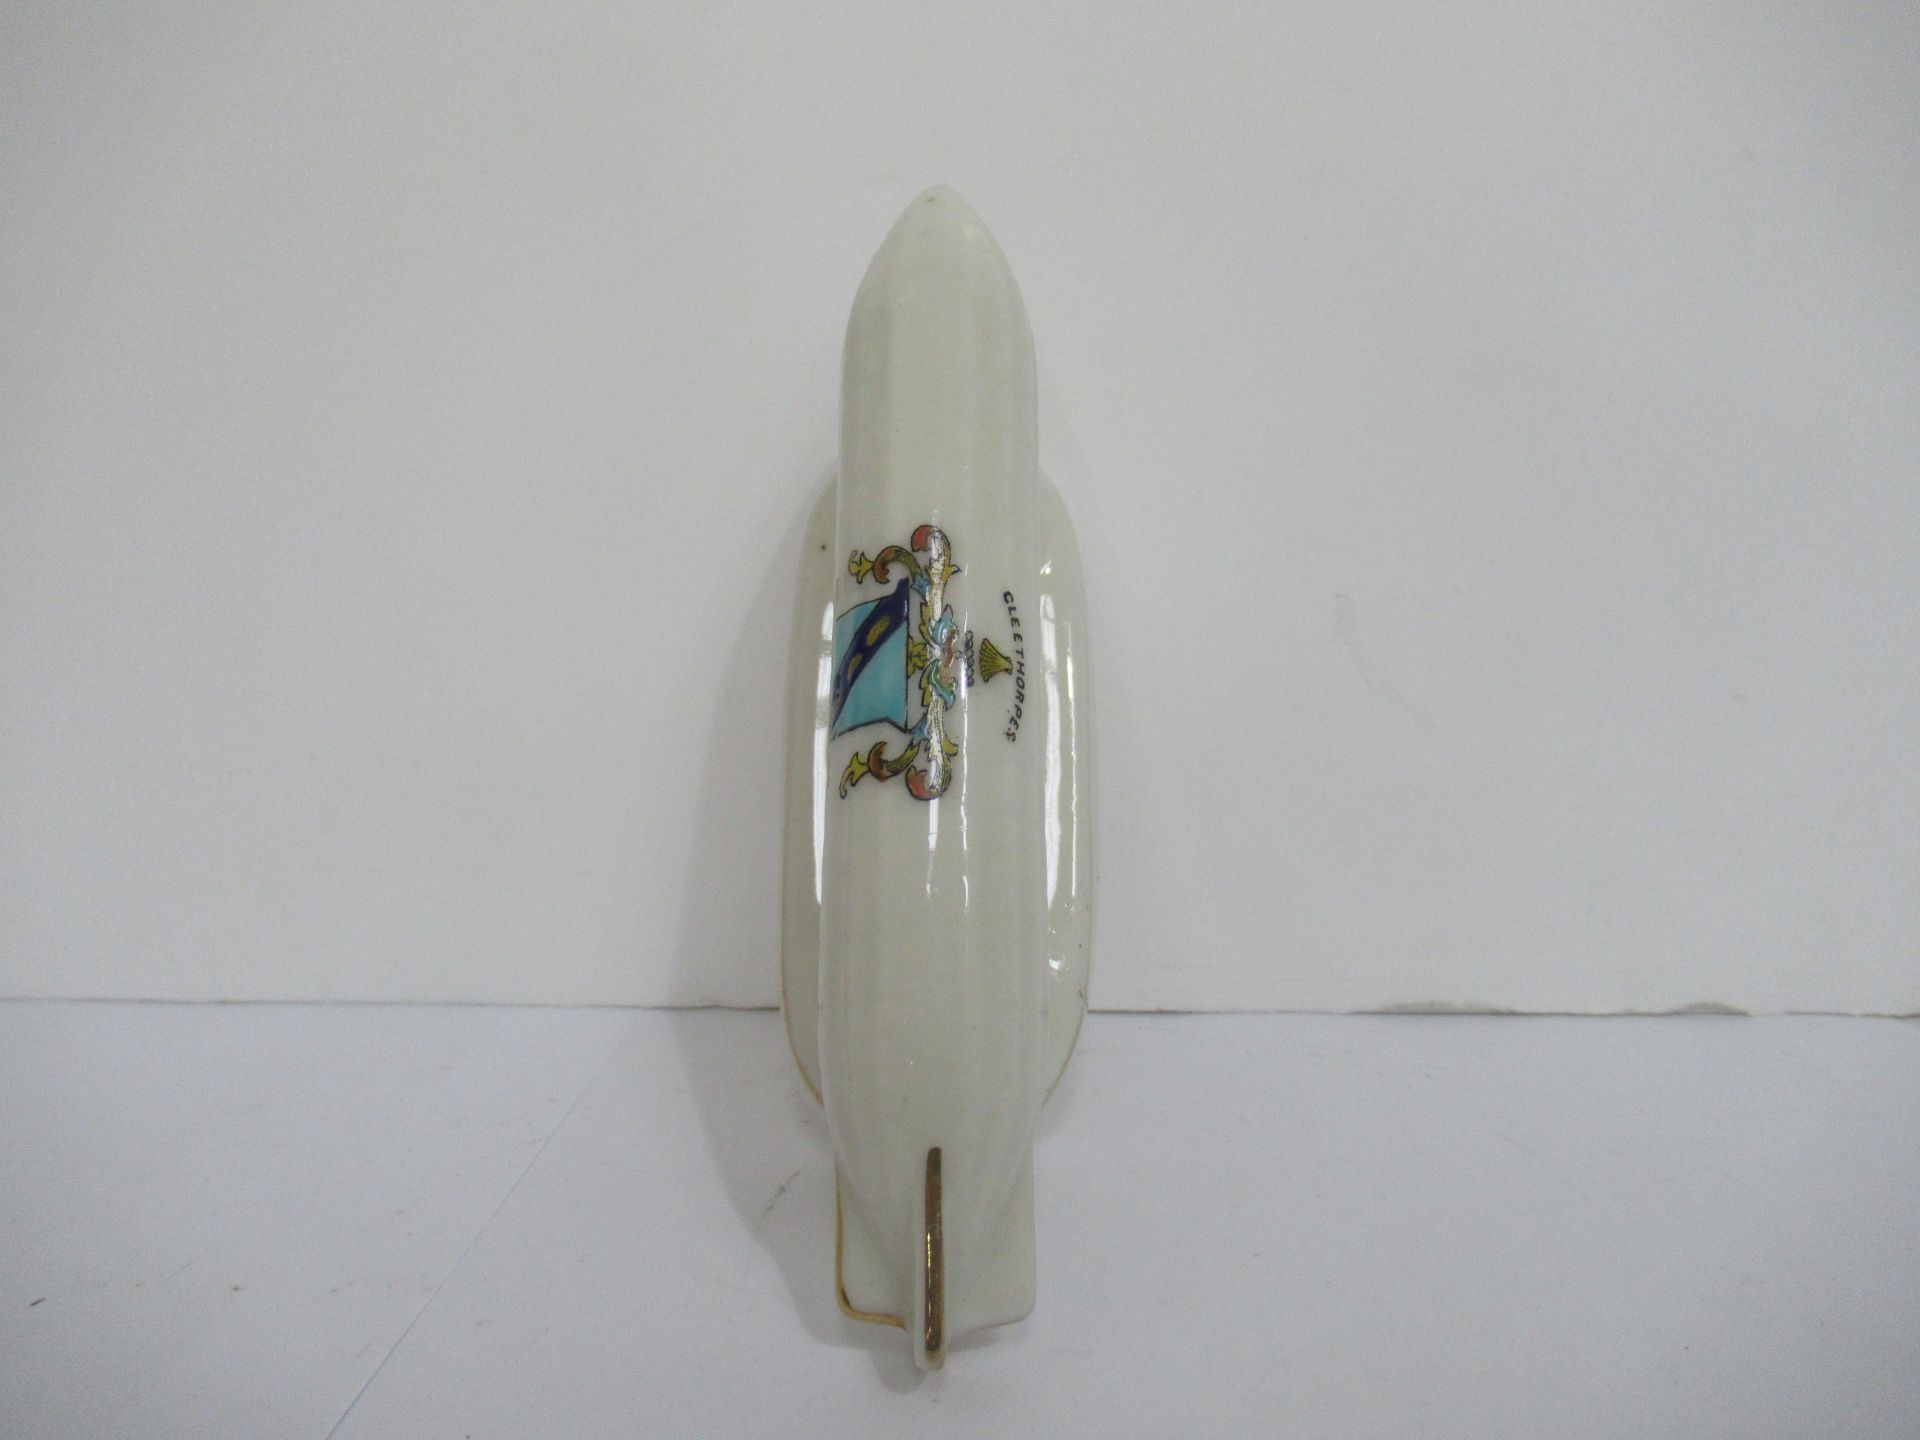 Crested China Alexandra model of airship with Cleethorpes coat of arms - Image 5 of 9